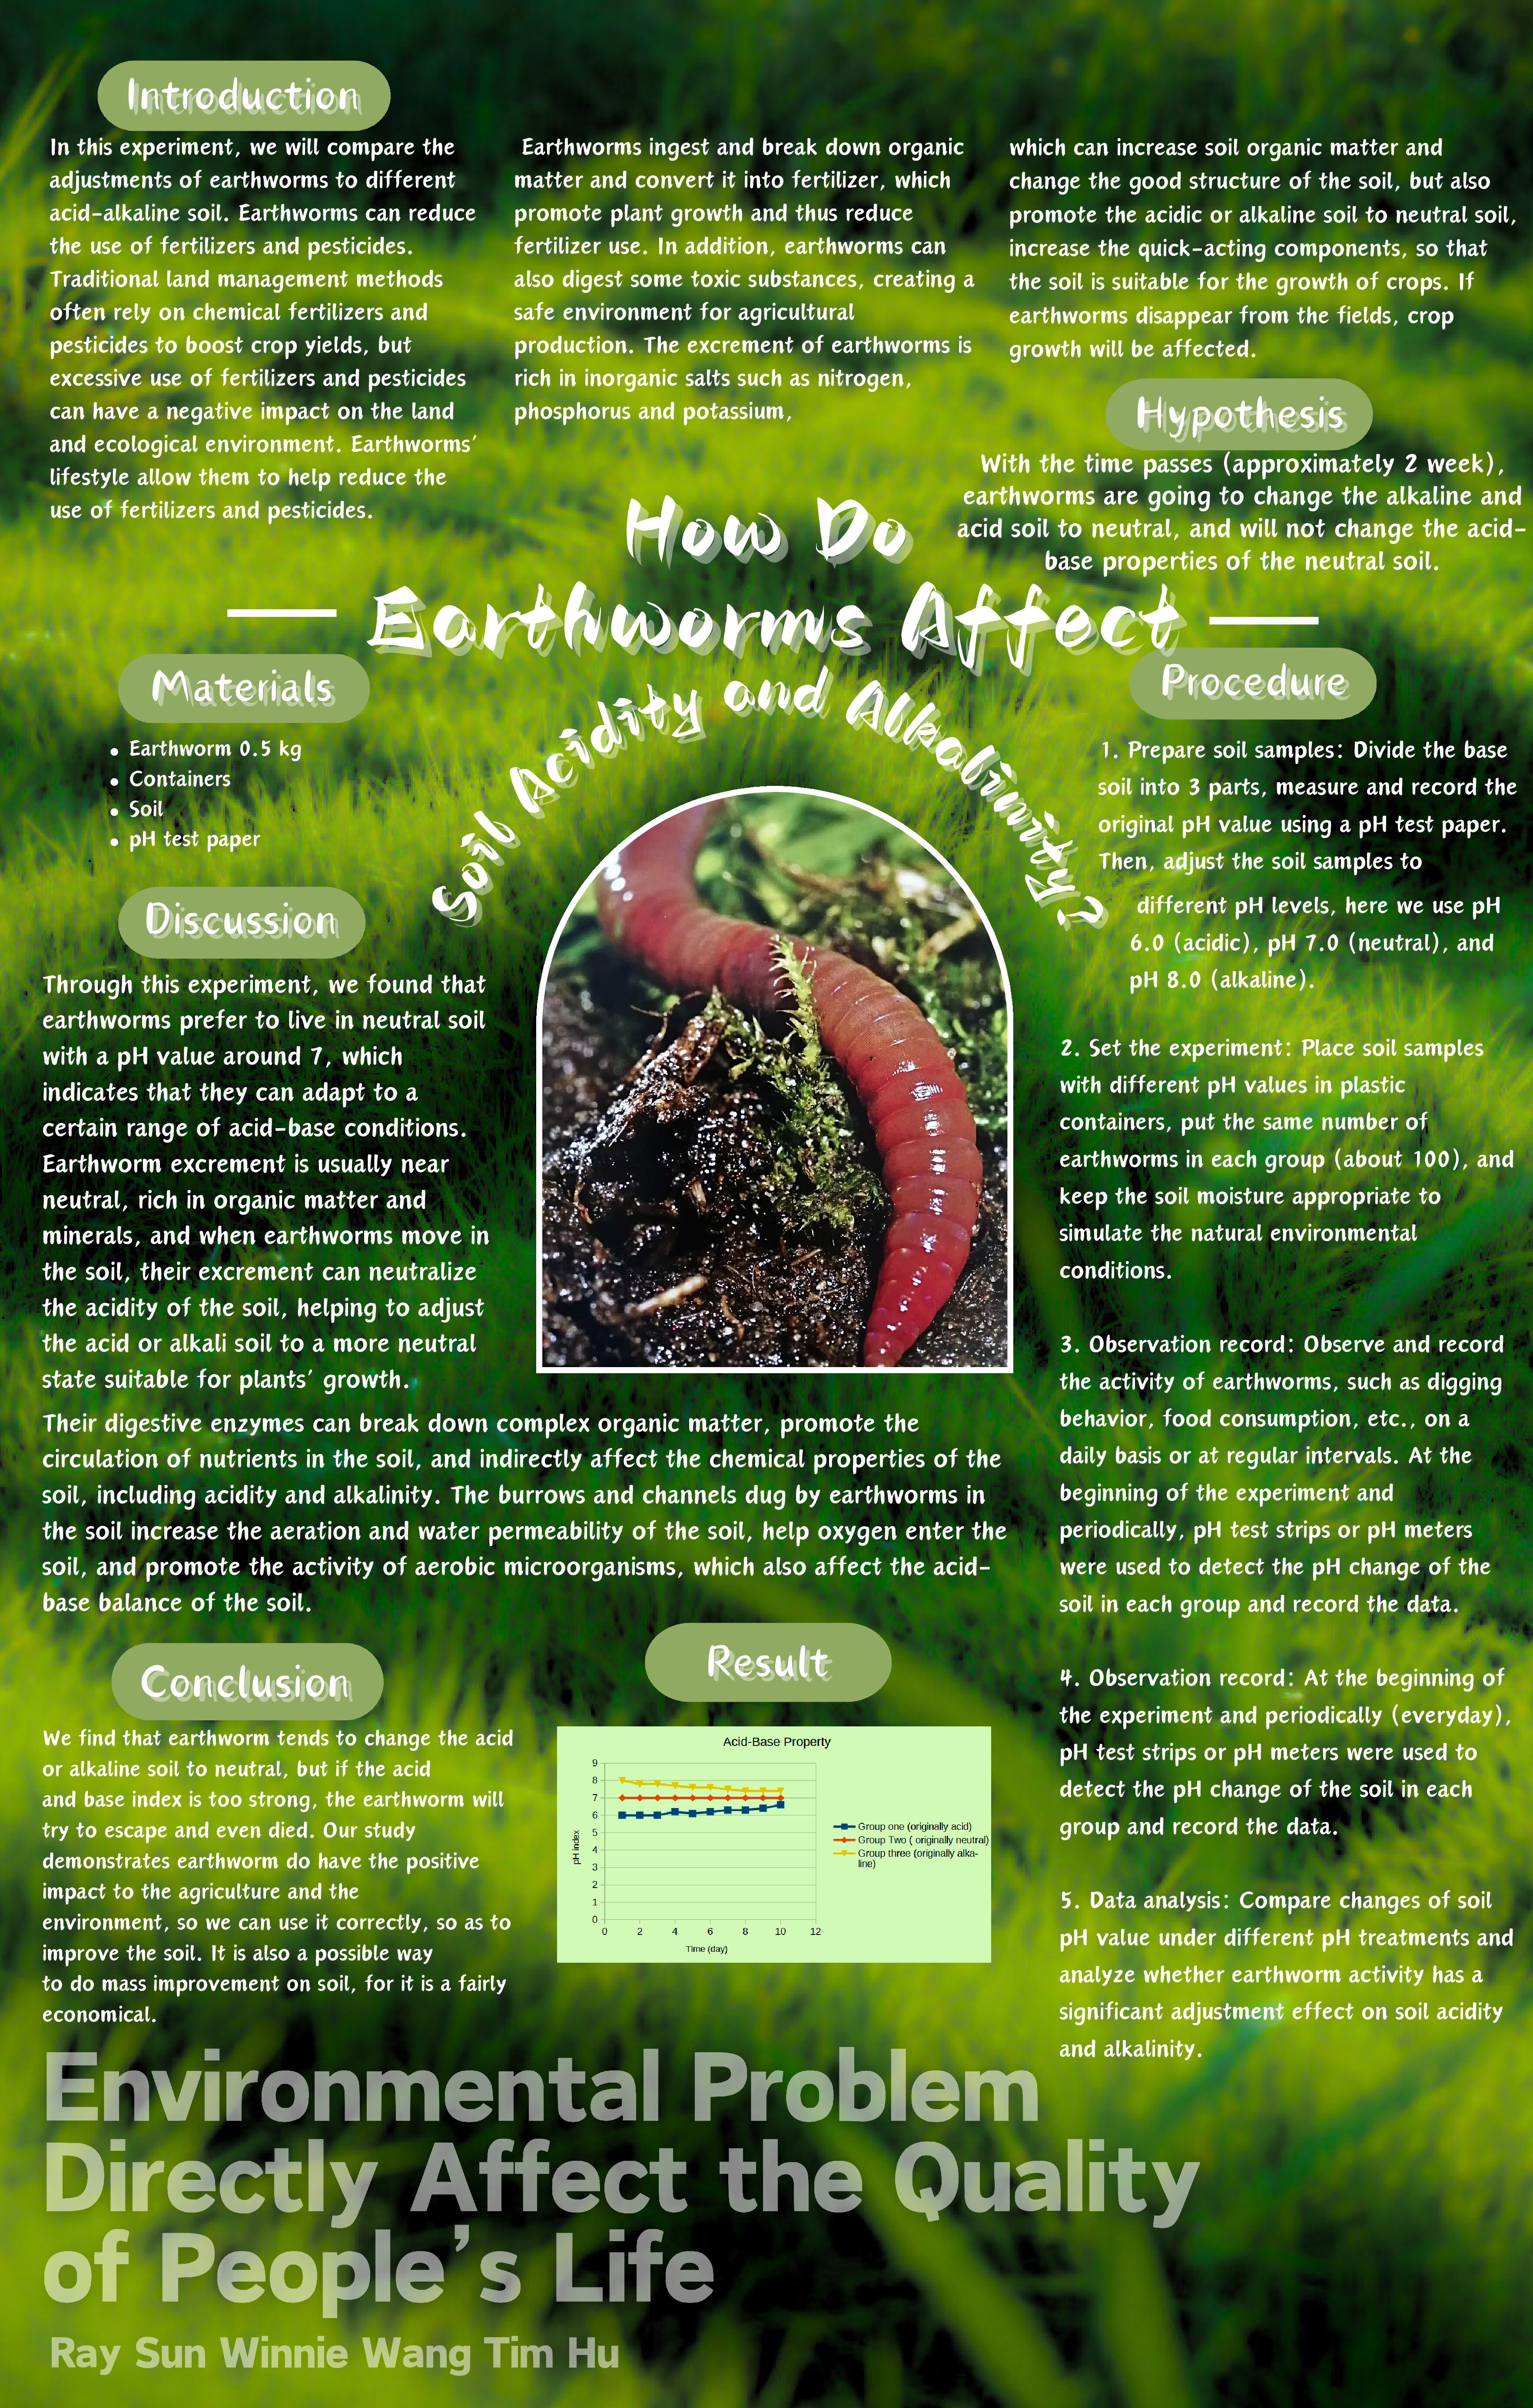 How do Earthworms affect soil acidity and alkalinity? 